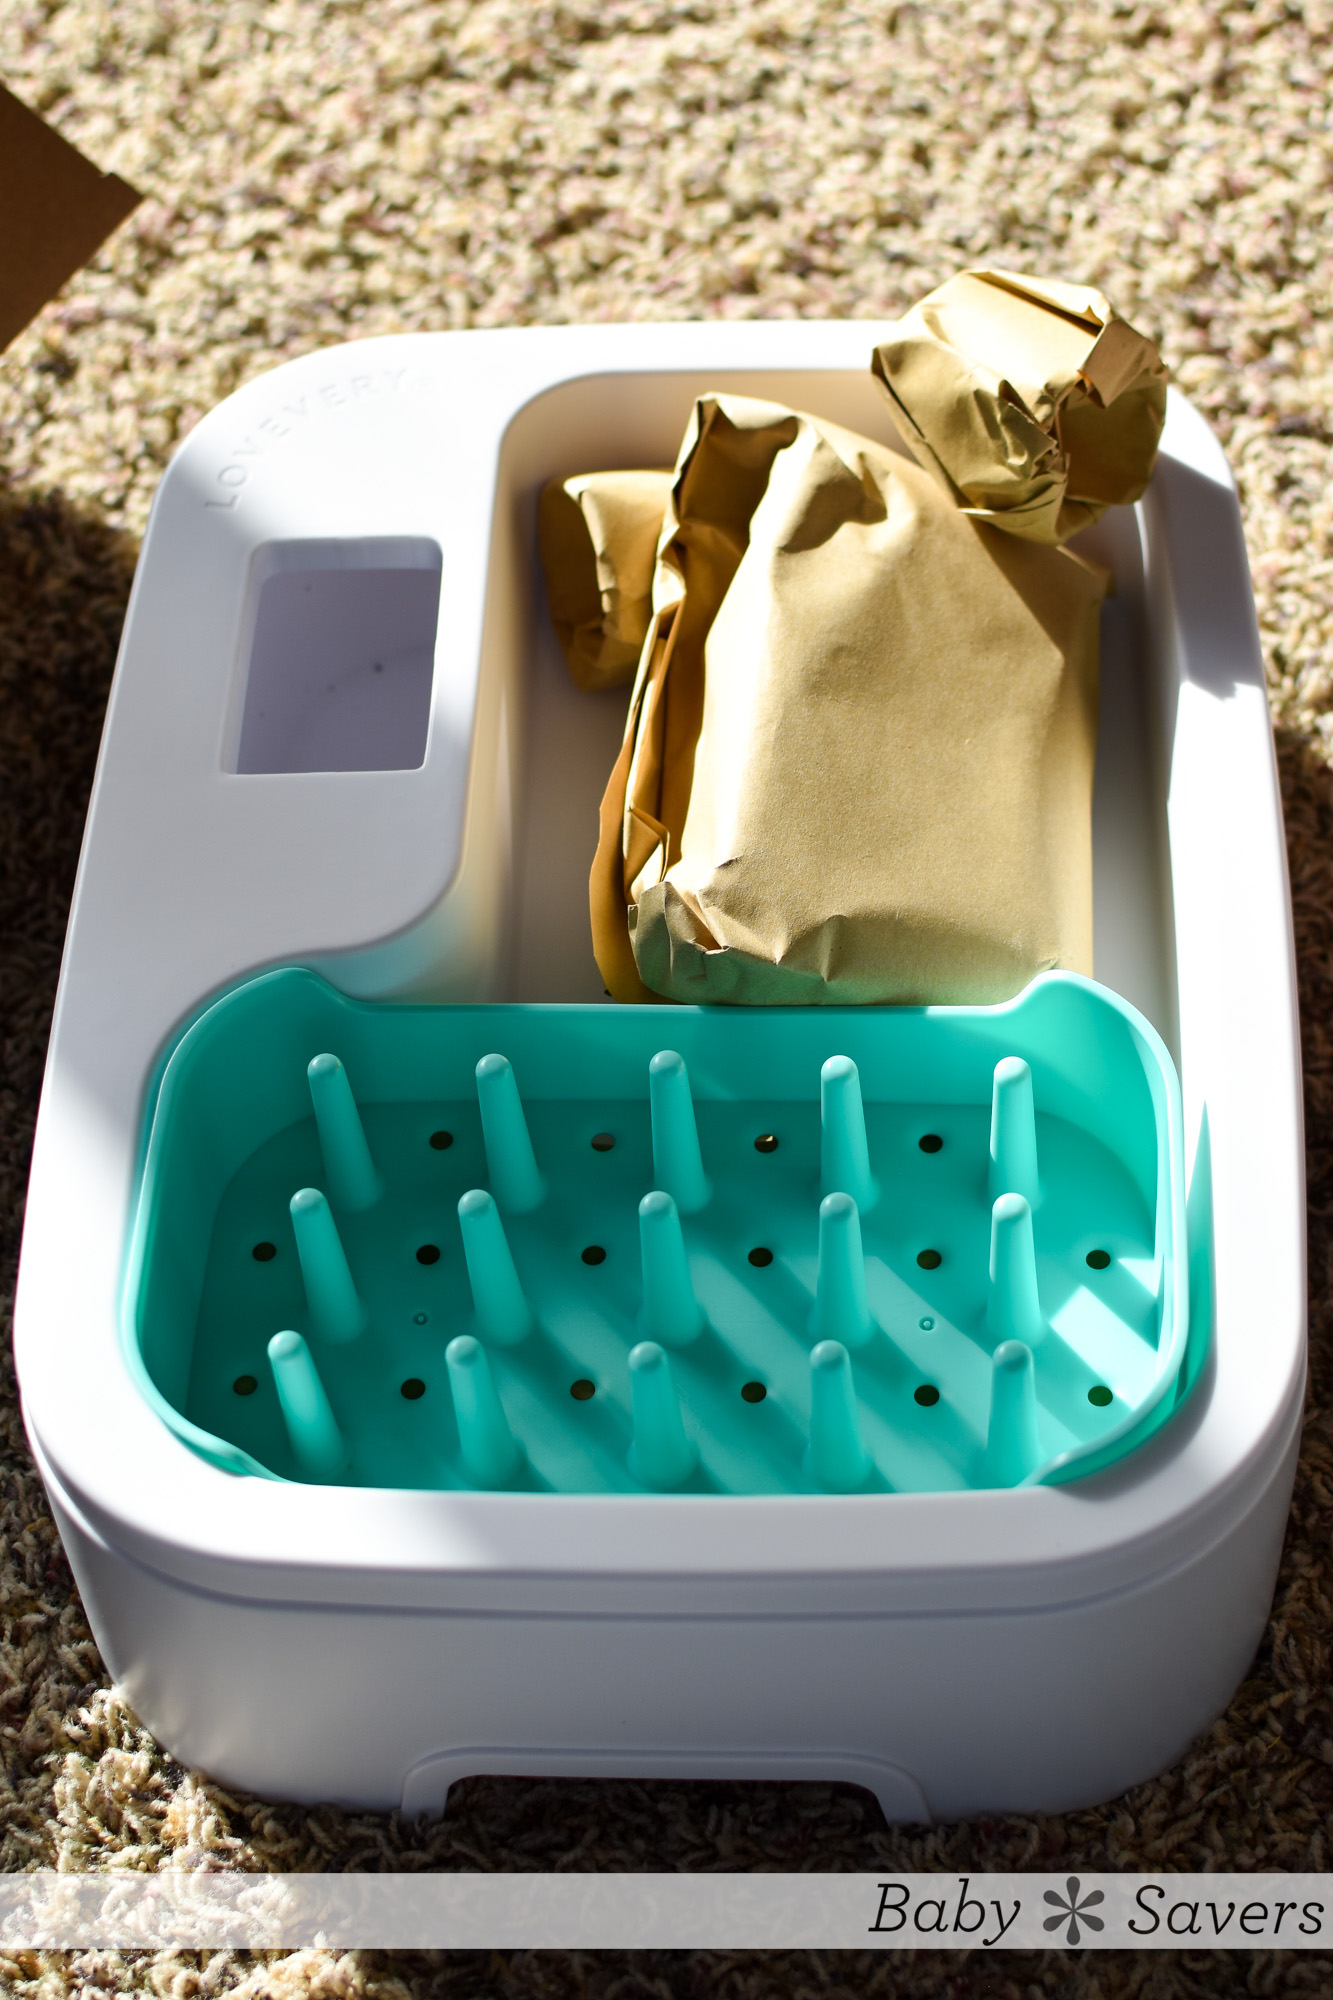 lovevery reviews the helper play kit with super sustainable sink